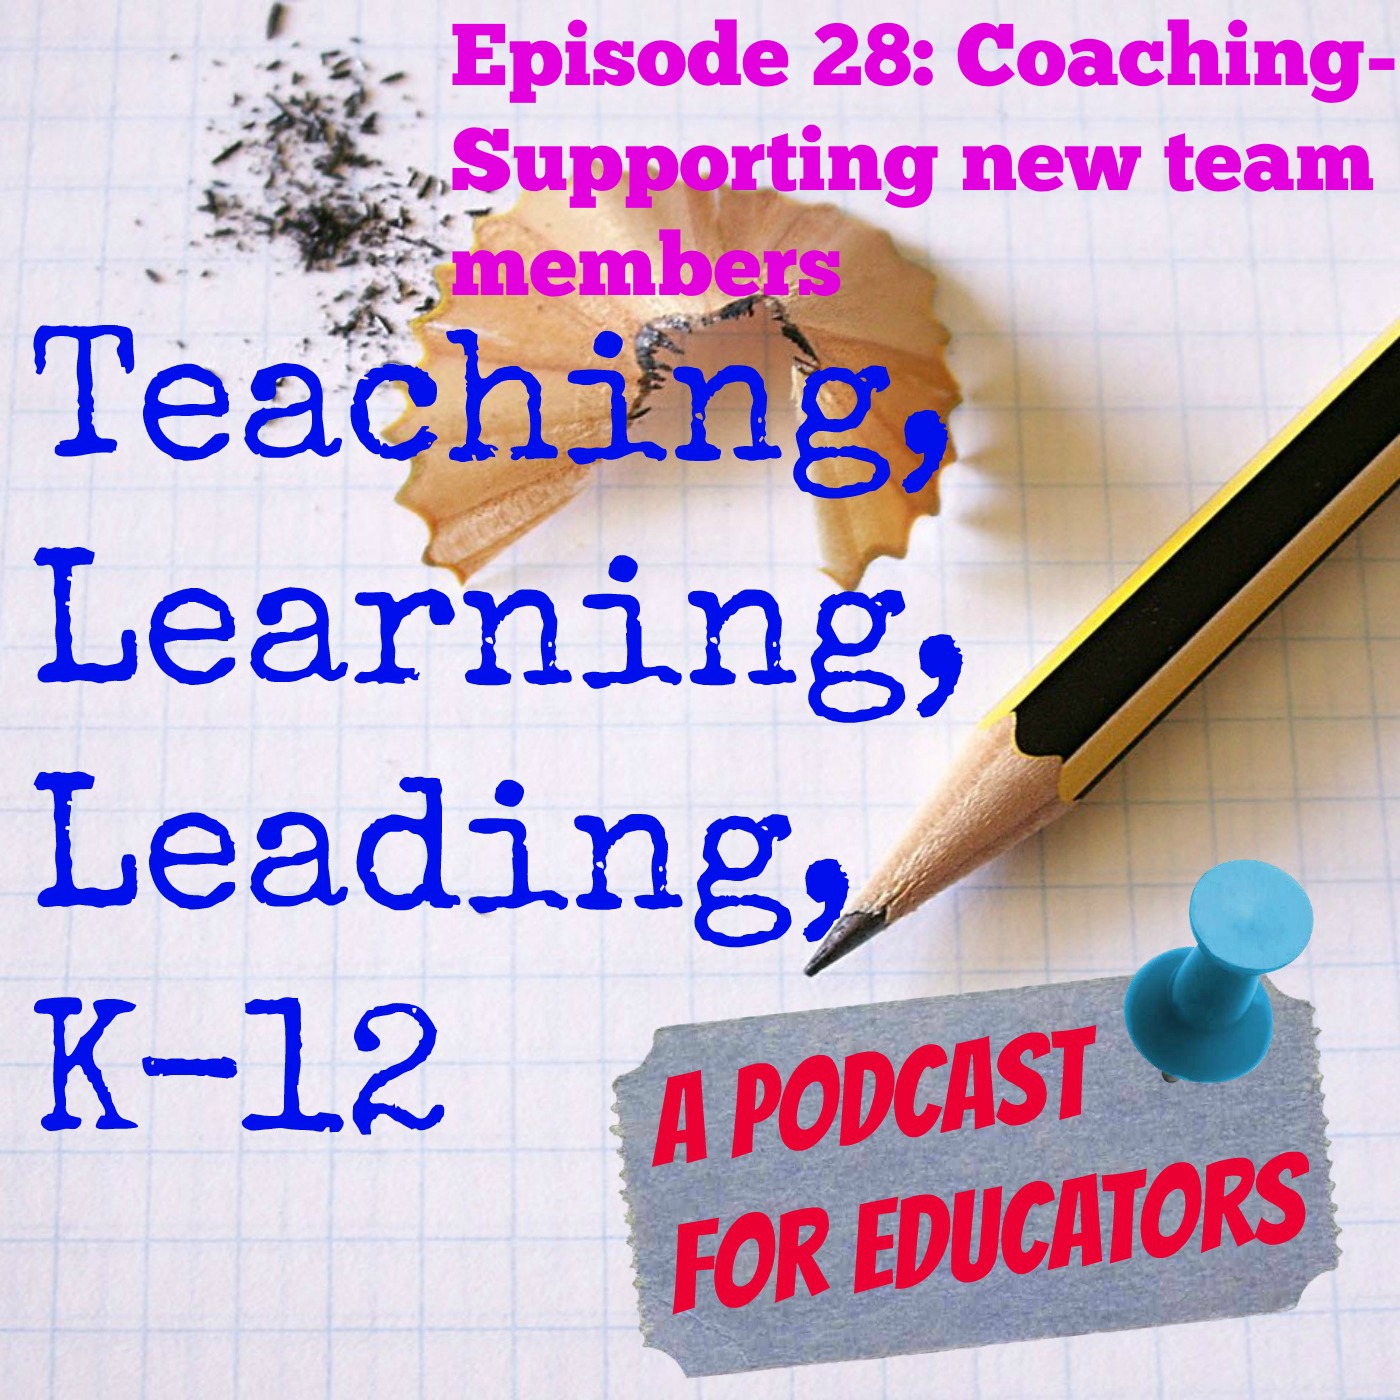 Episode 28: Coaching-Supporting New Team Members